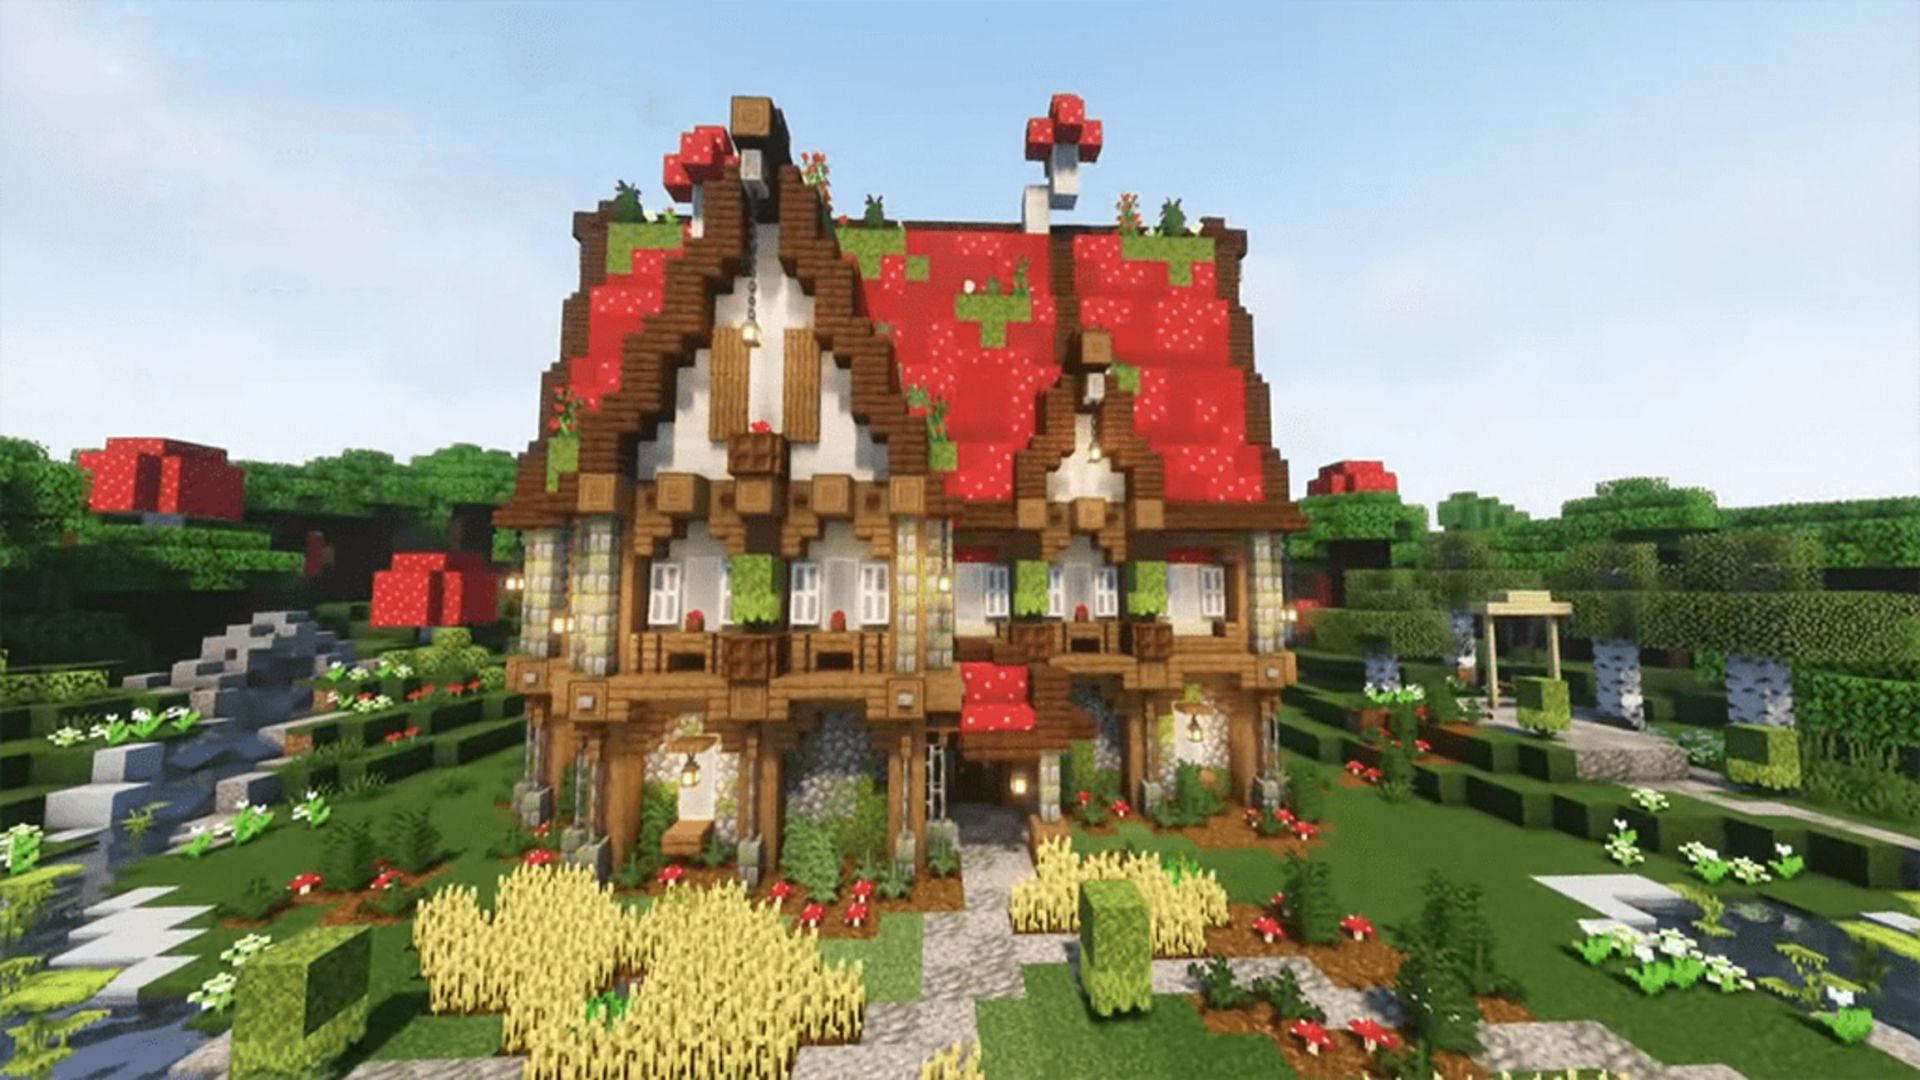 This design takes a step up from a standard mushroom house (Image via jjaaxxthelegend/YouTube)